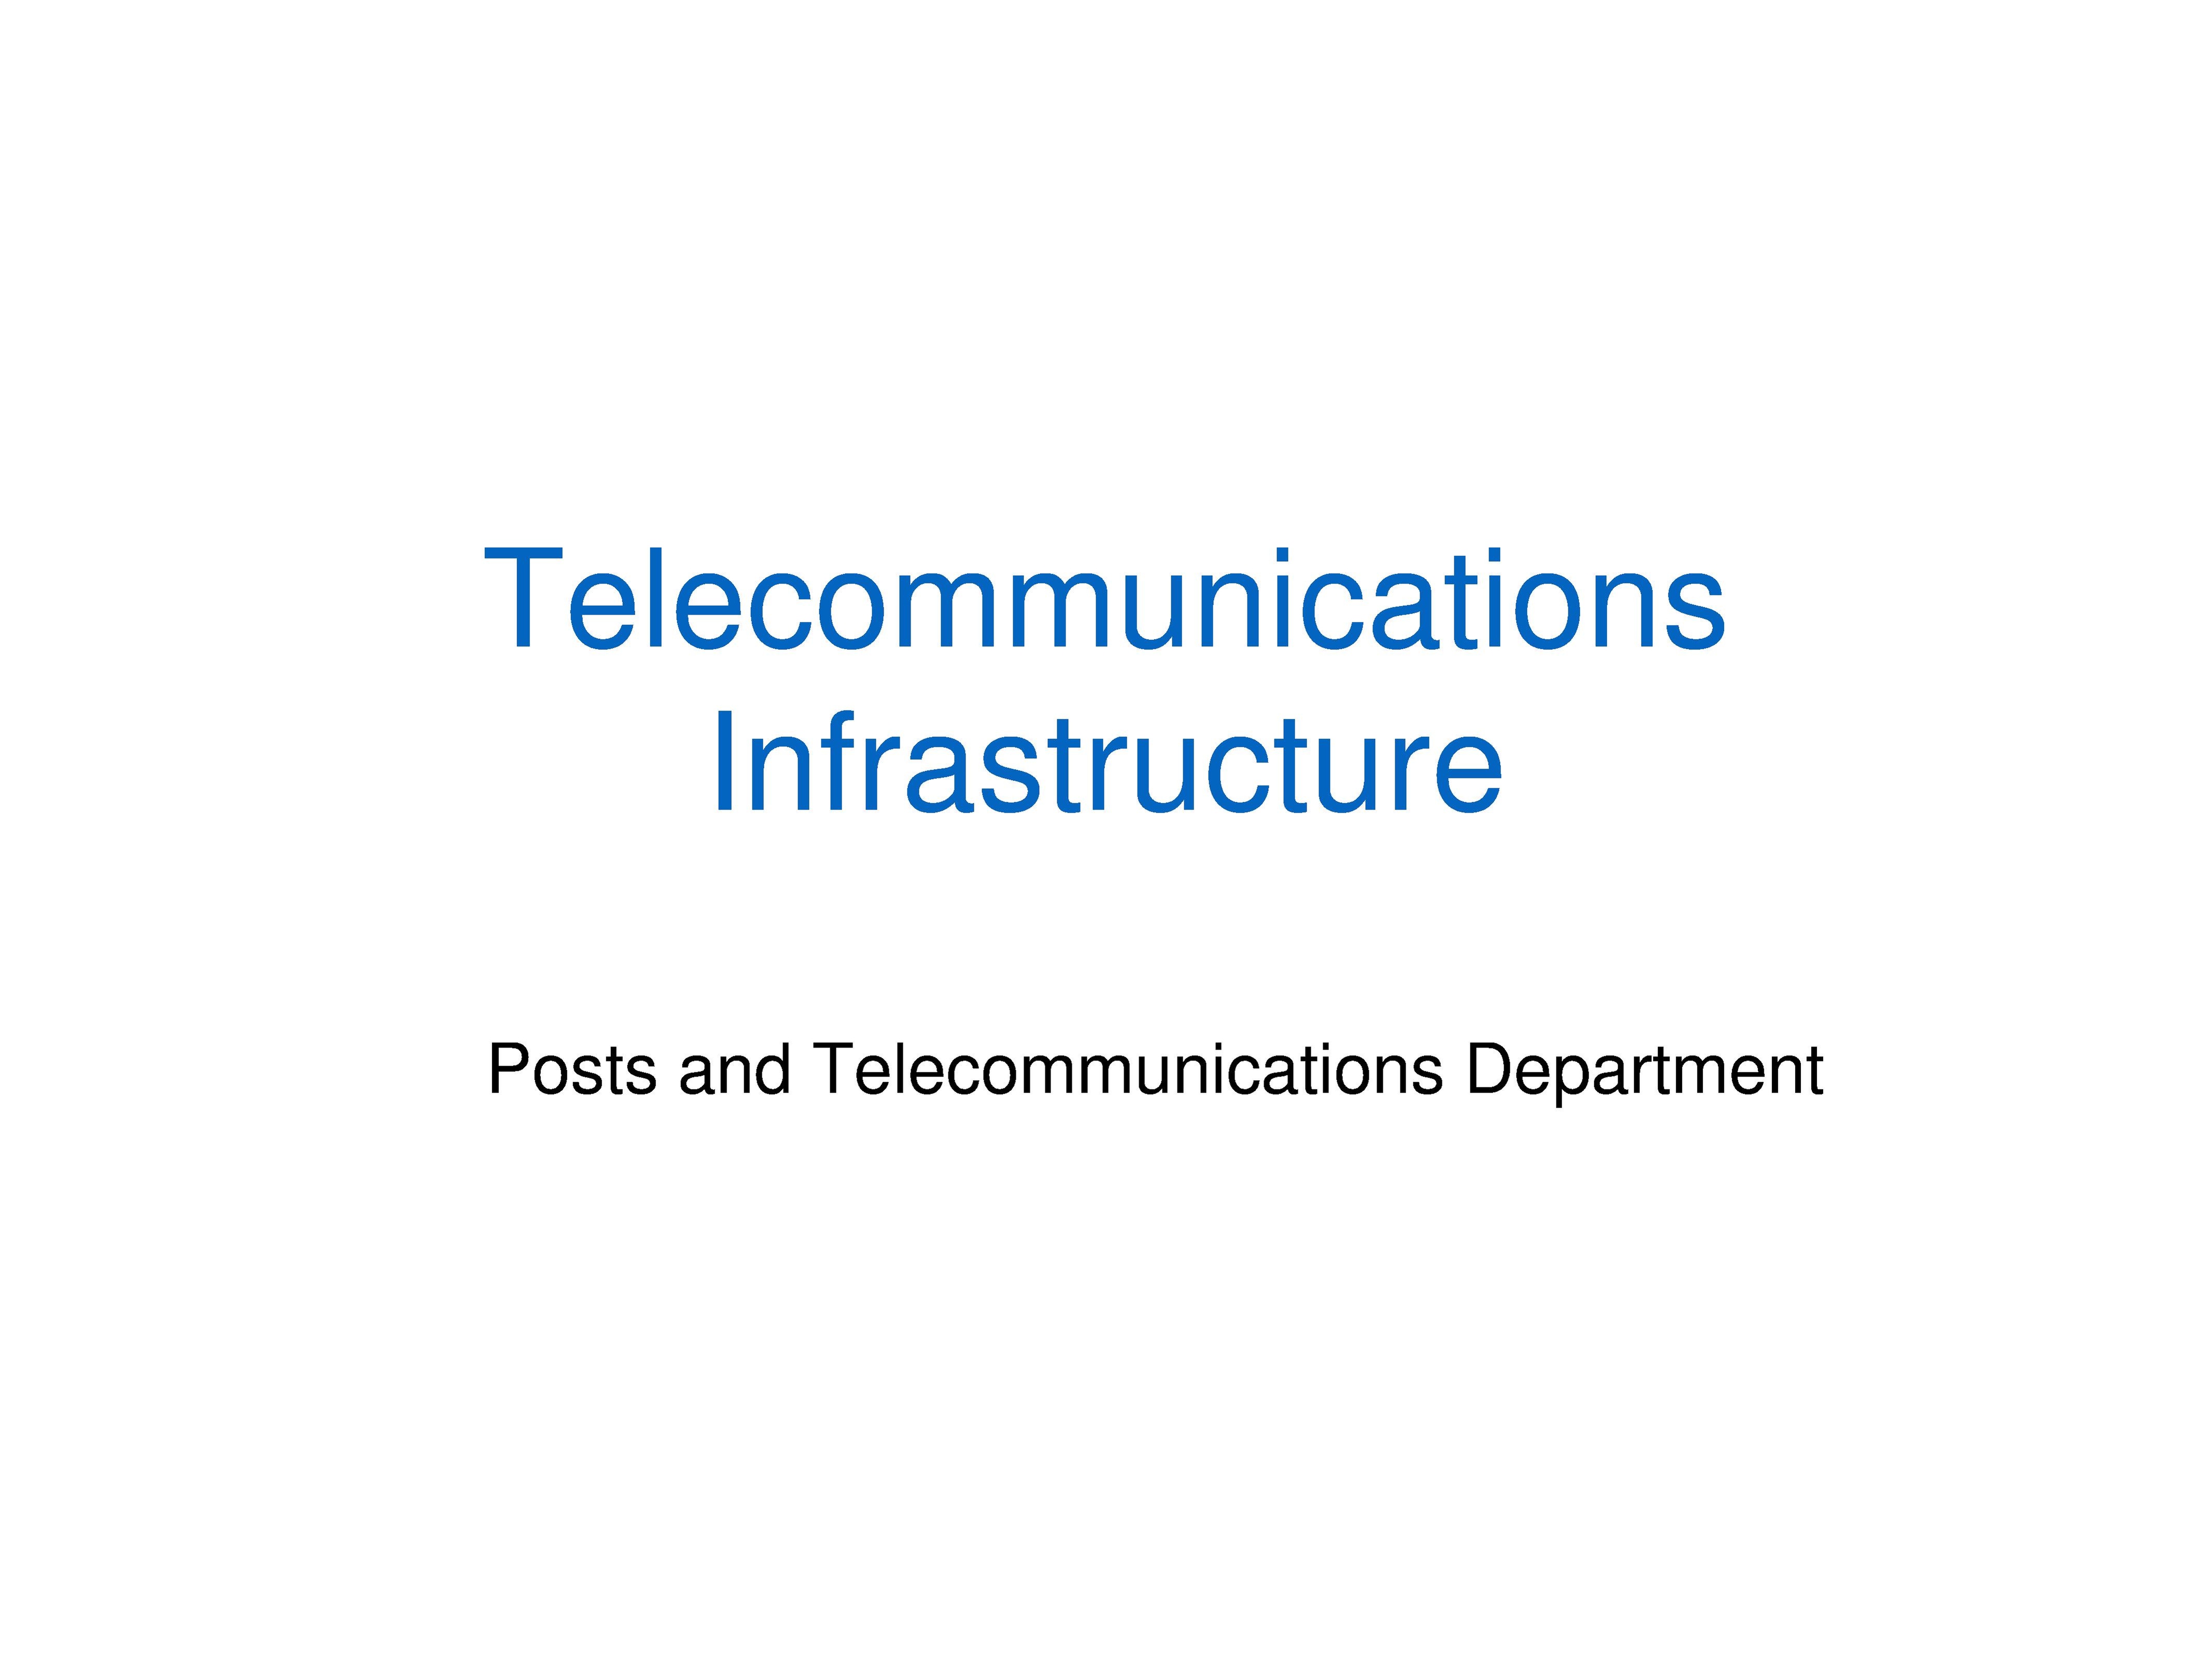 MOCIT - Telecommunications Infrastructure, Posts and Telecommunications Department